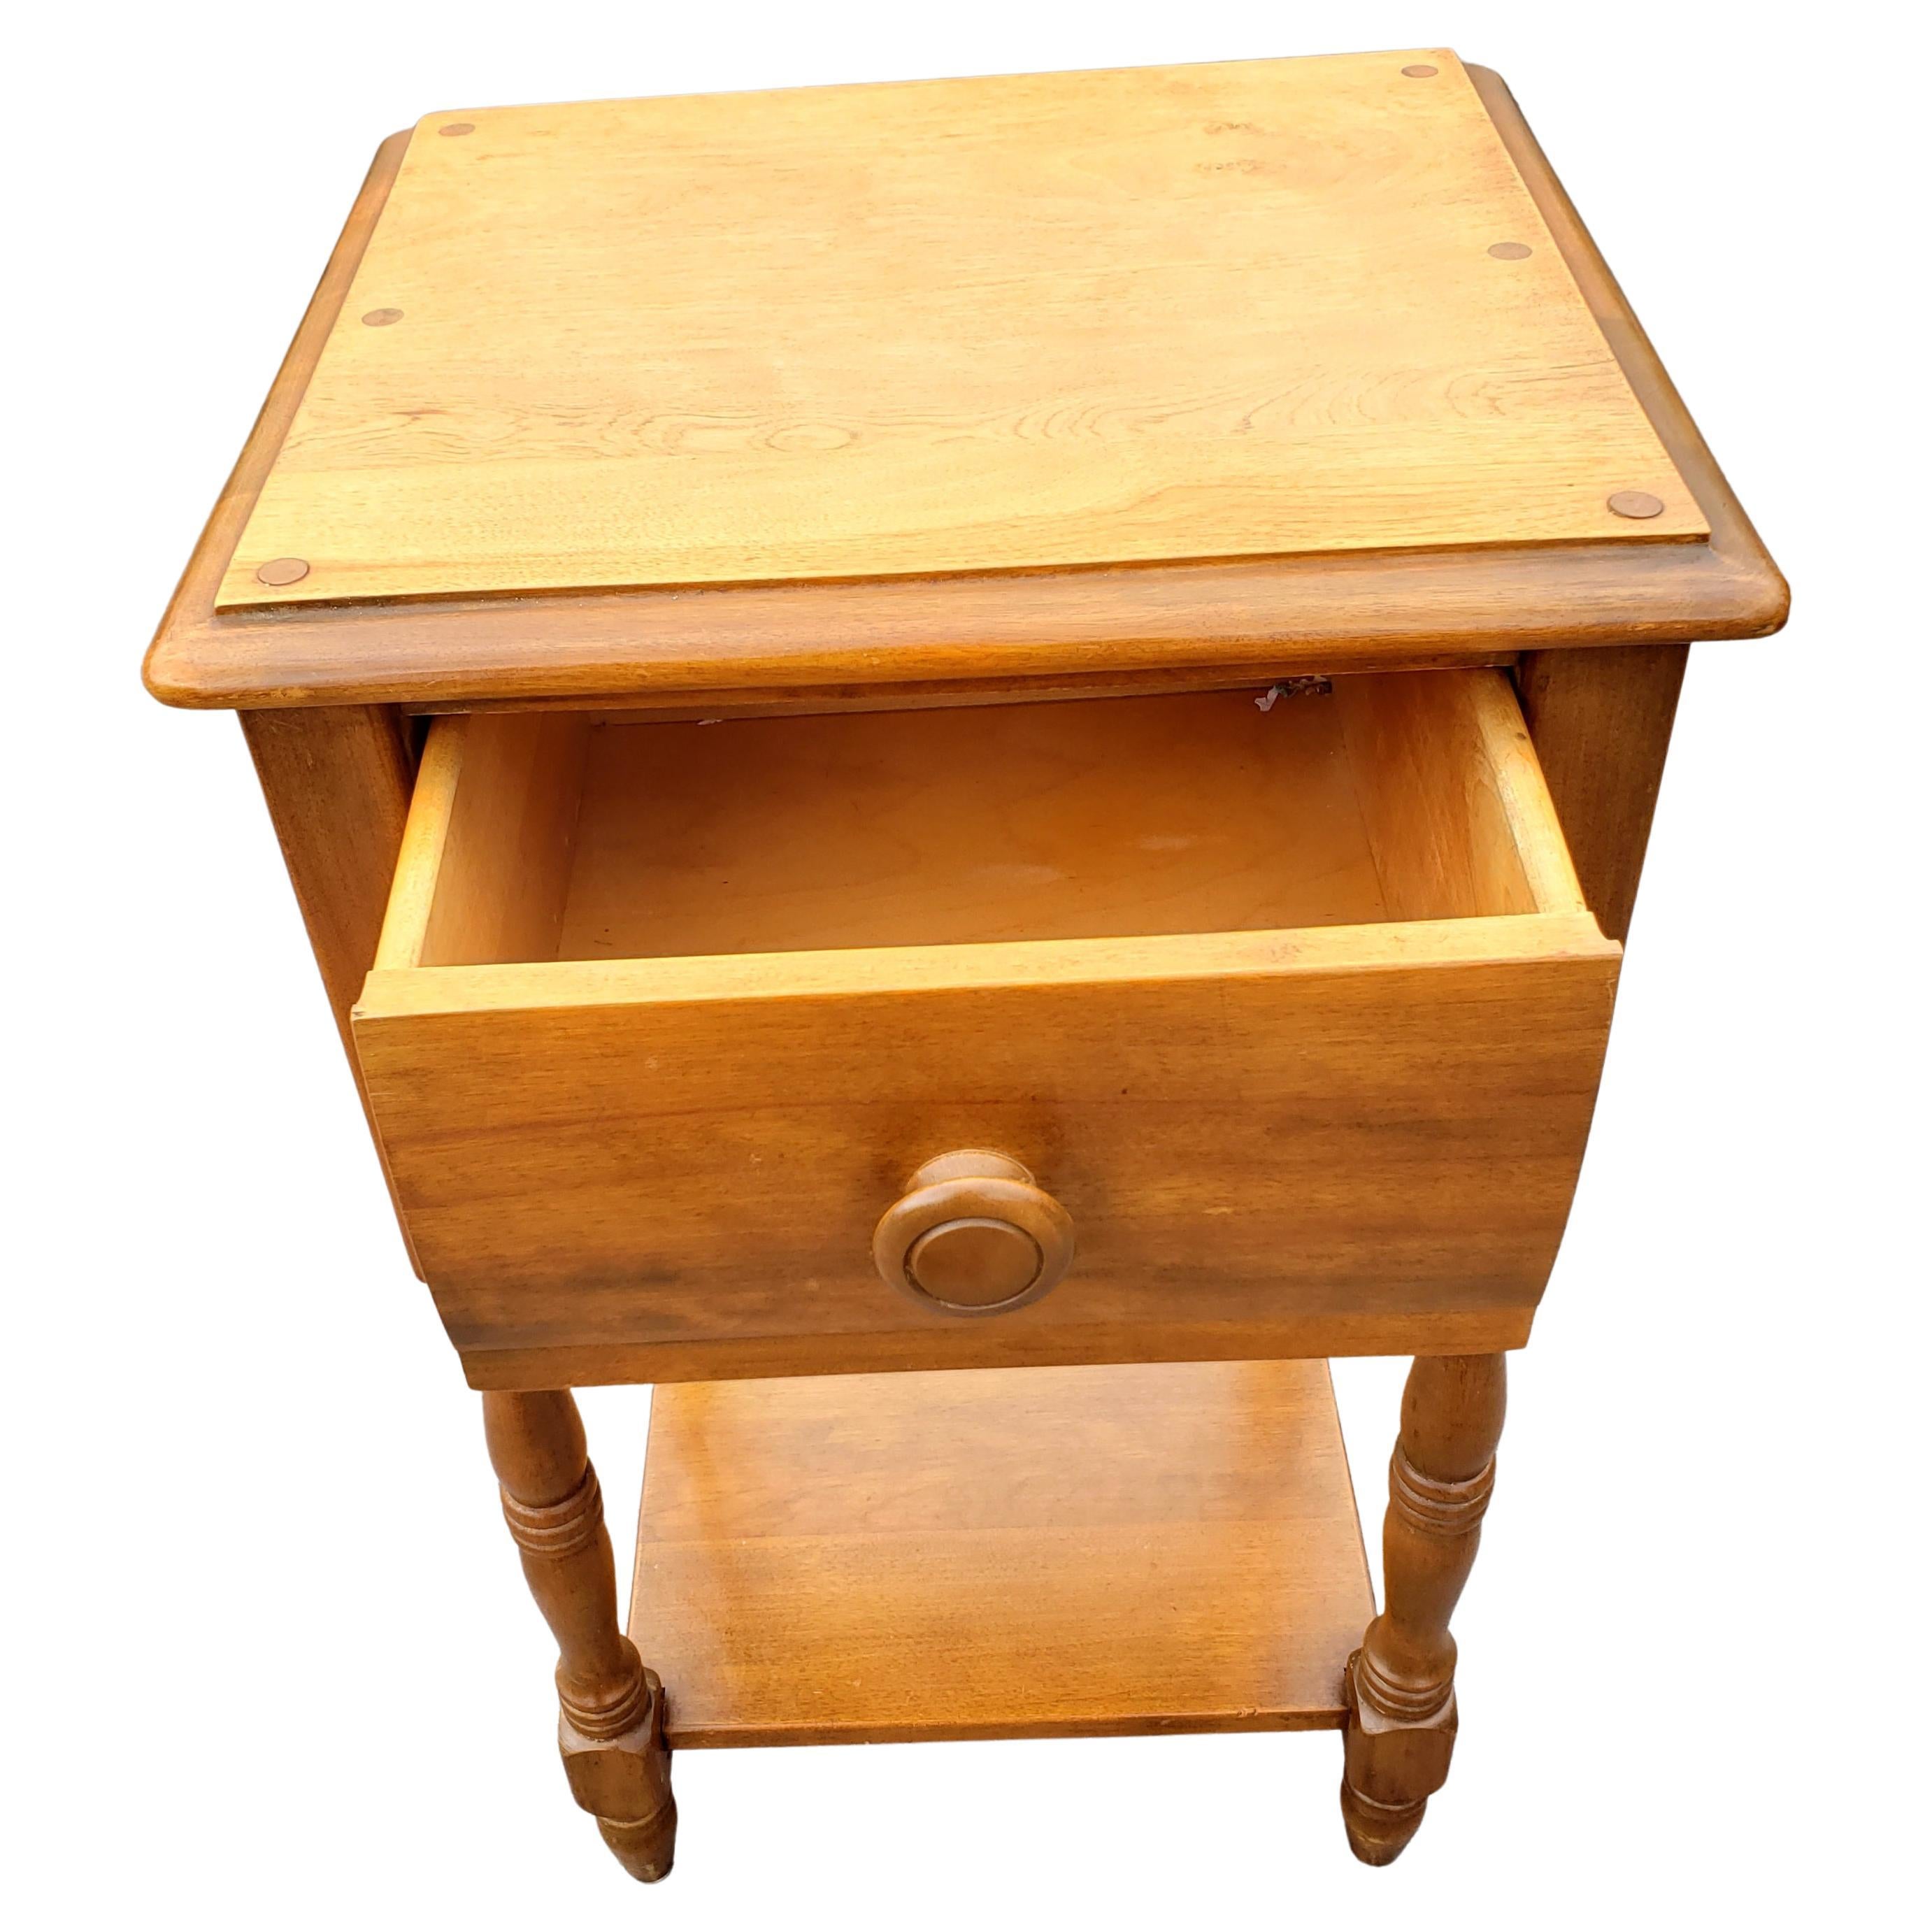 Hand-Crafted Antique Solid Maple Nightstand Side Table, Circa 1940s For Sale